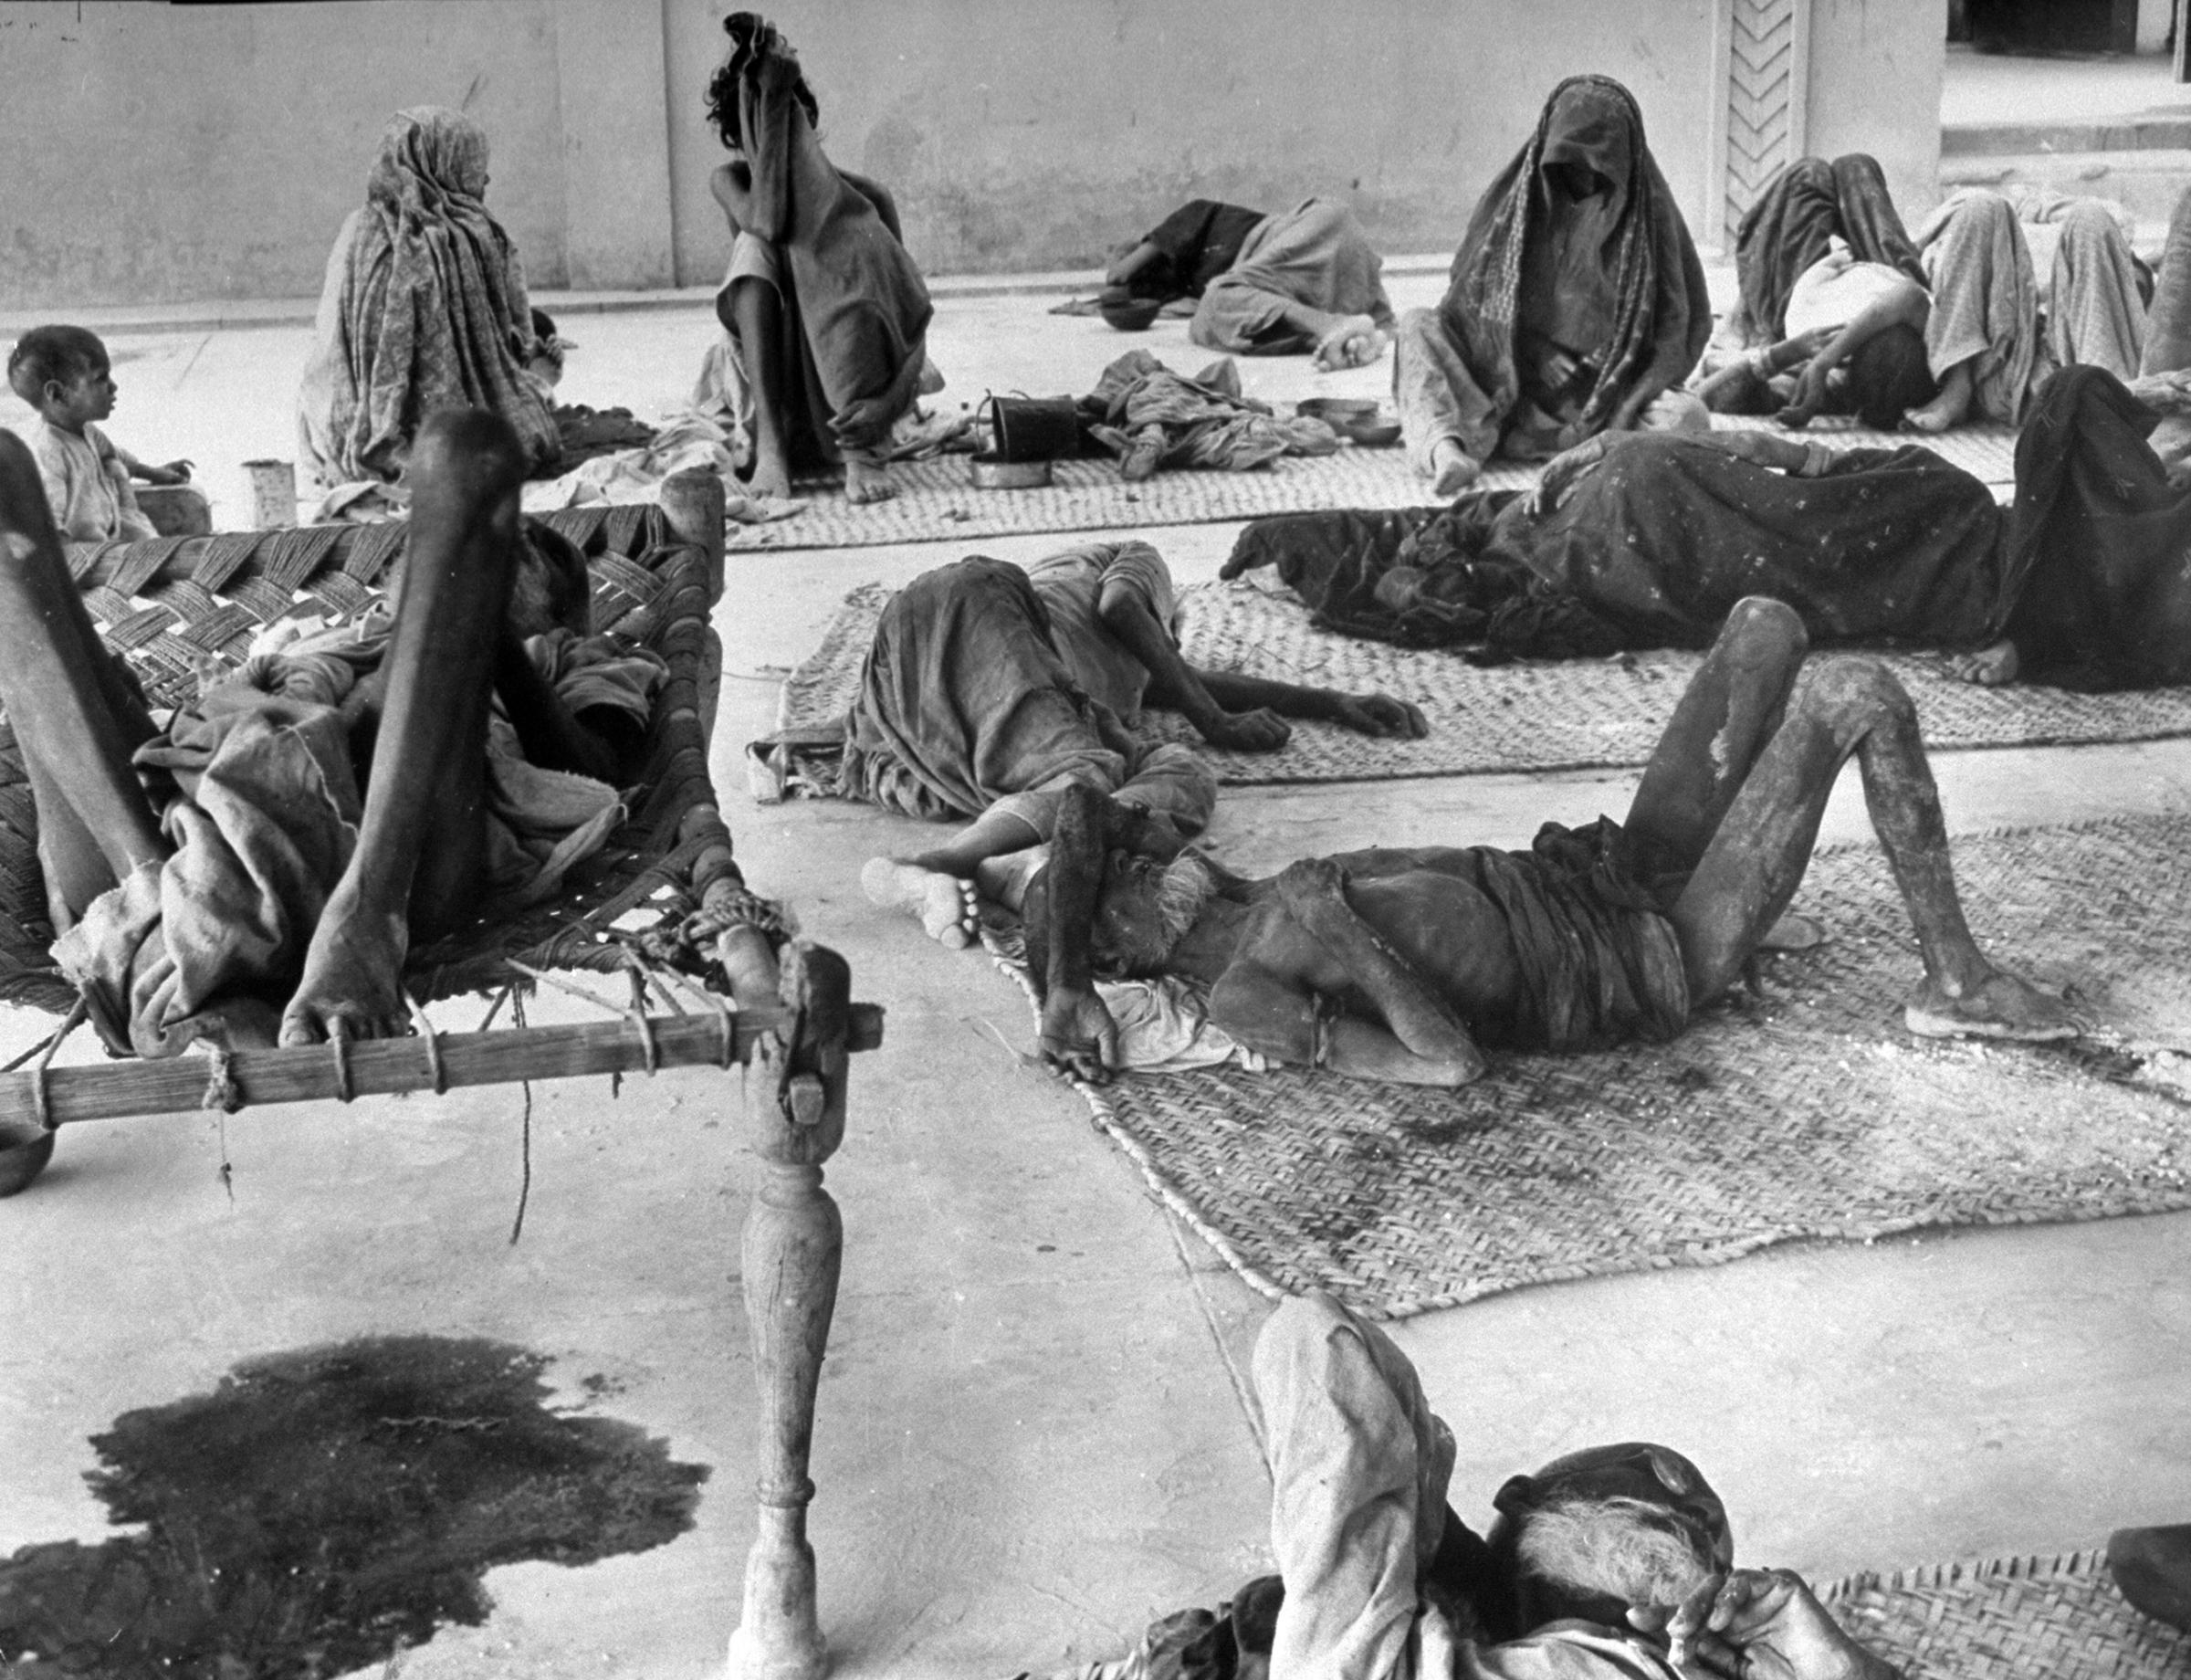 Moslem refugee cholera patients in filthy conditions at Infectious Disease Hospital upon their arrival after their long march from Delhi, India.